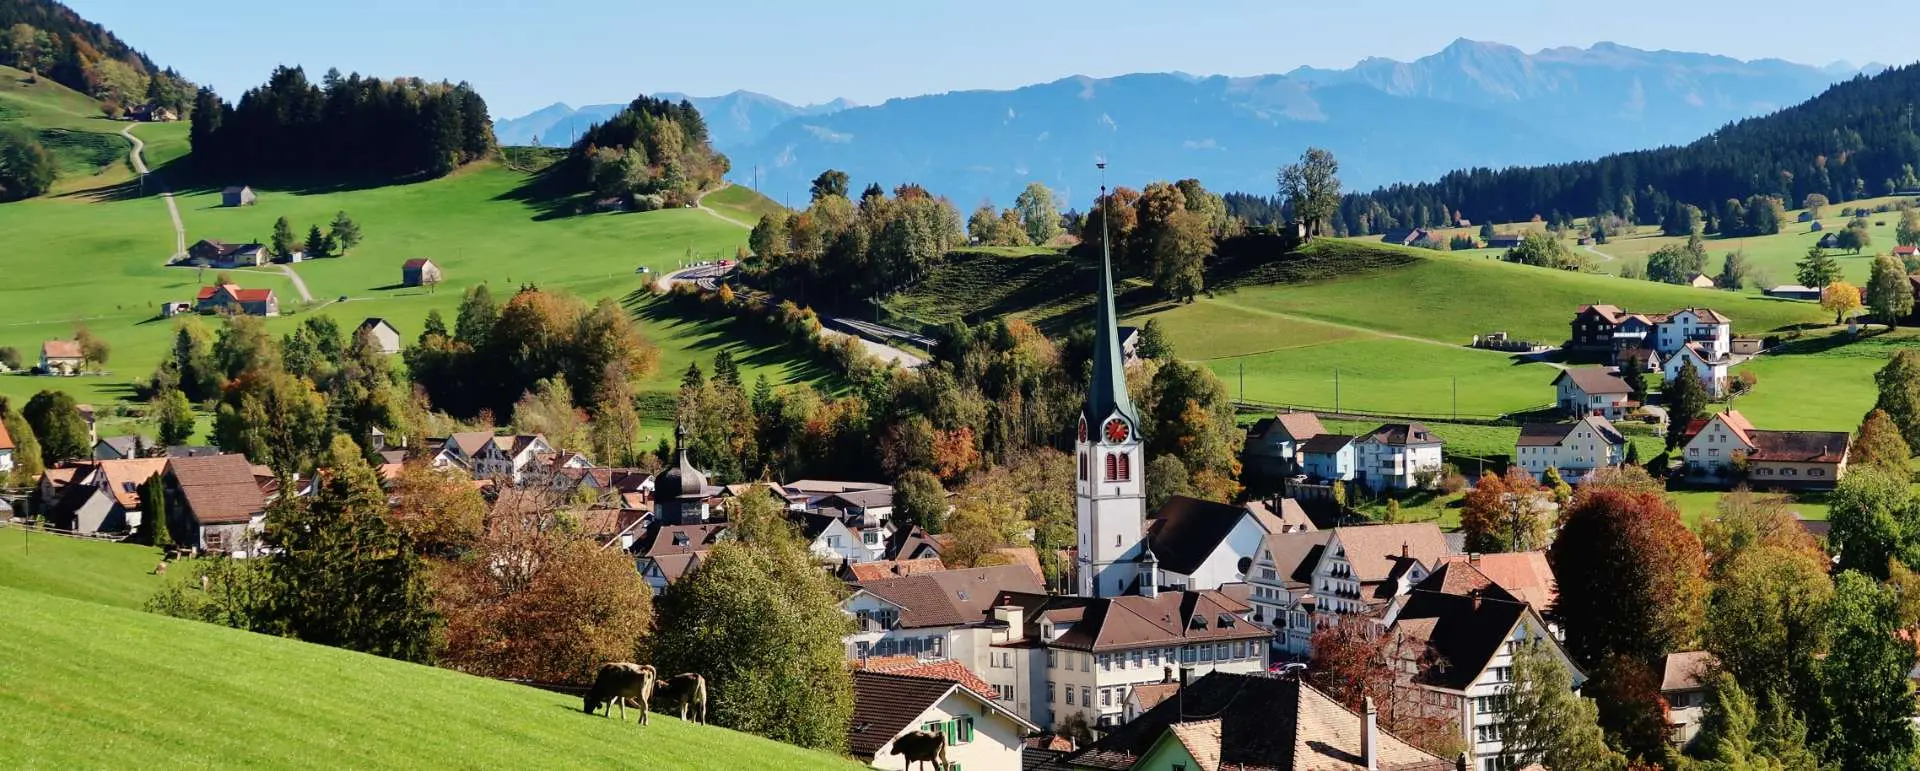 Appenzell - the destination for sports teams